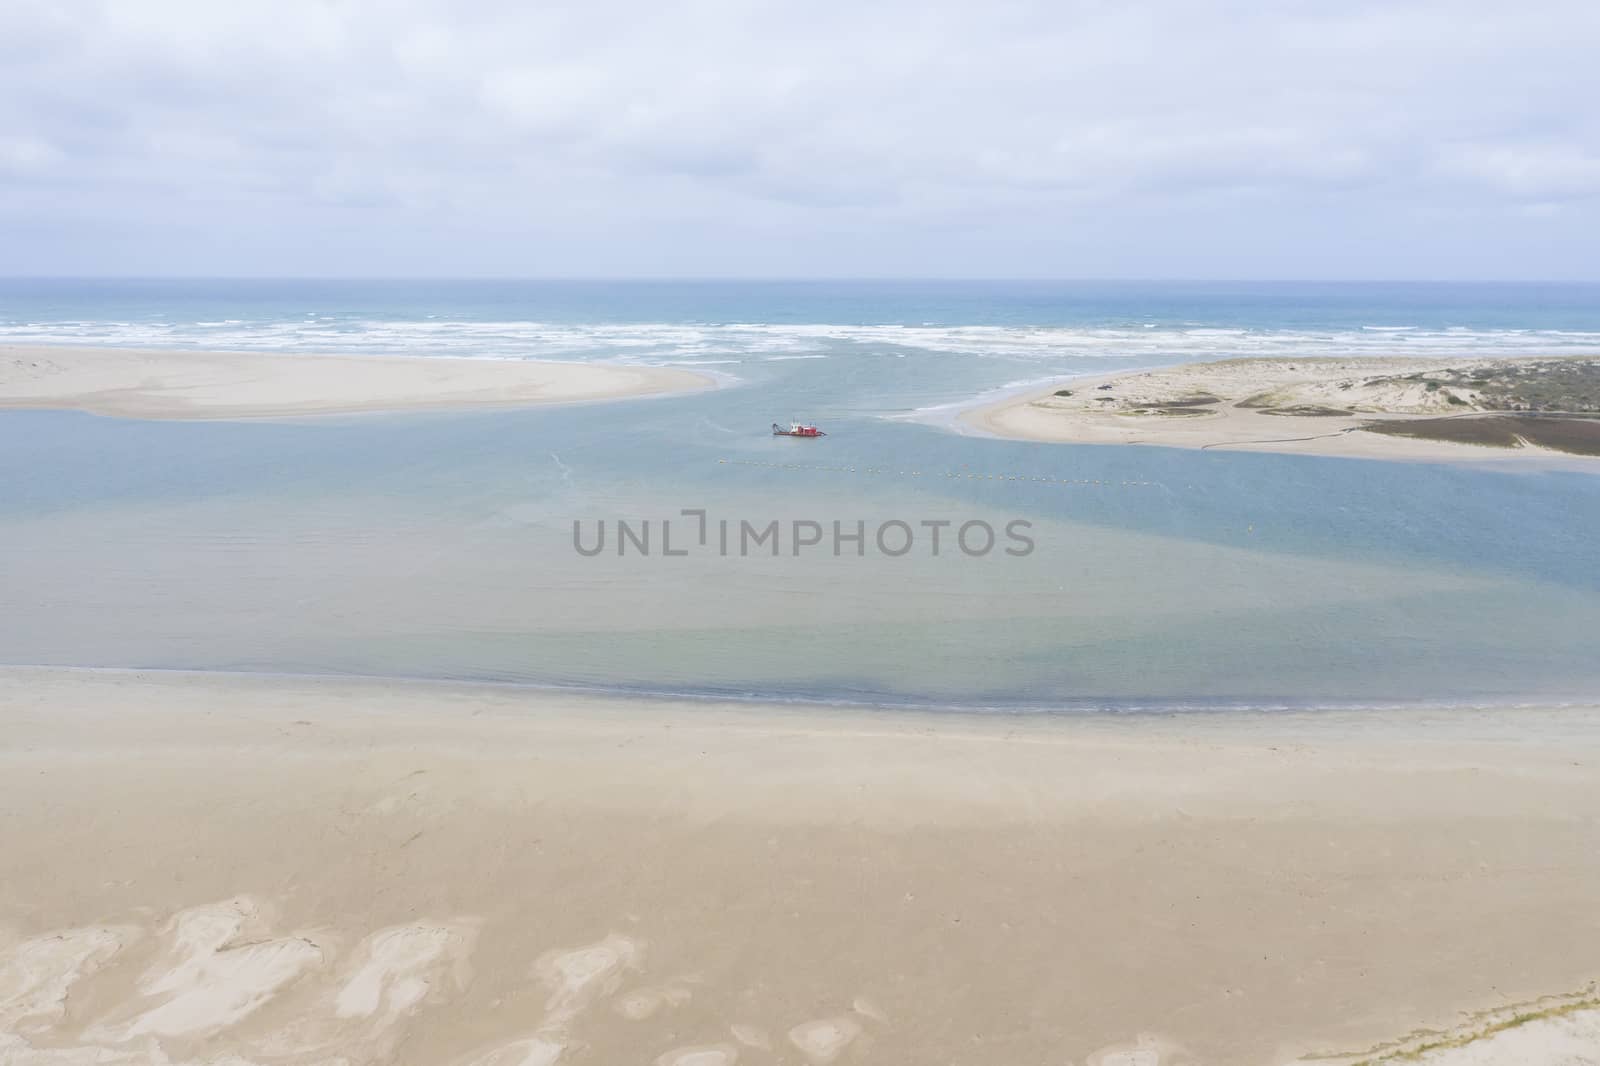 Aerial view of a sand dredger boat at the mouth of the Murray River in South Australia